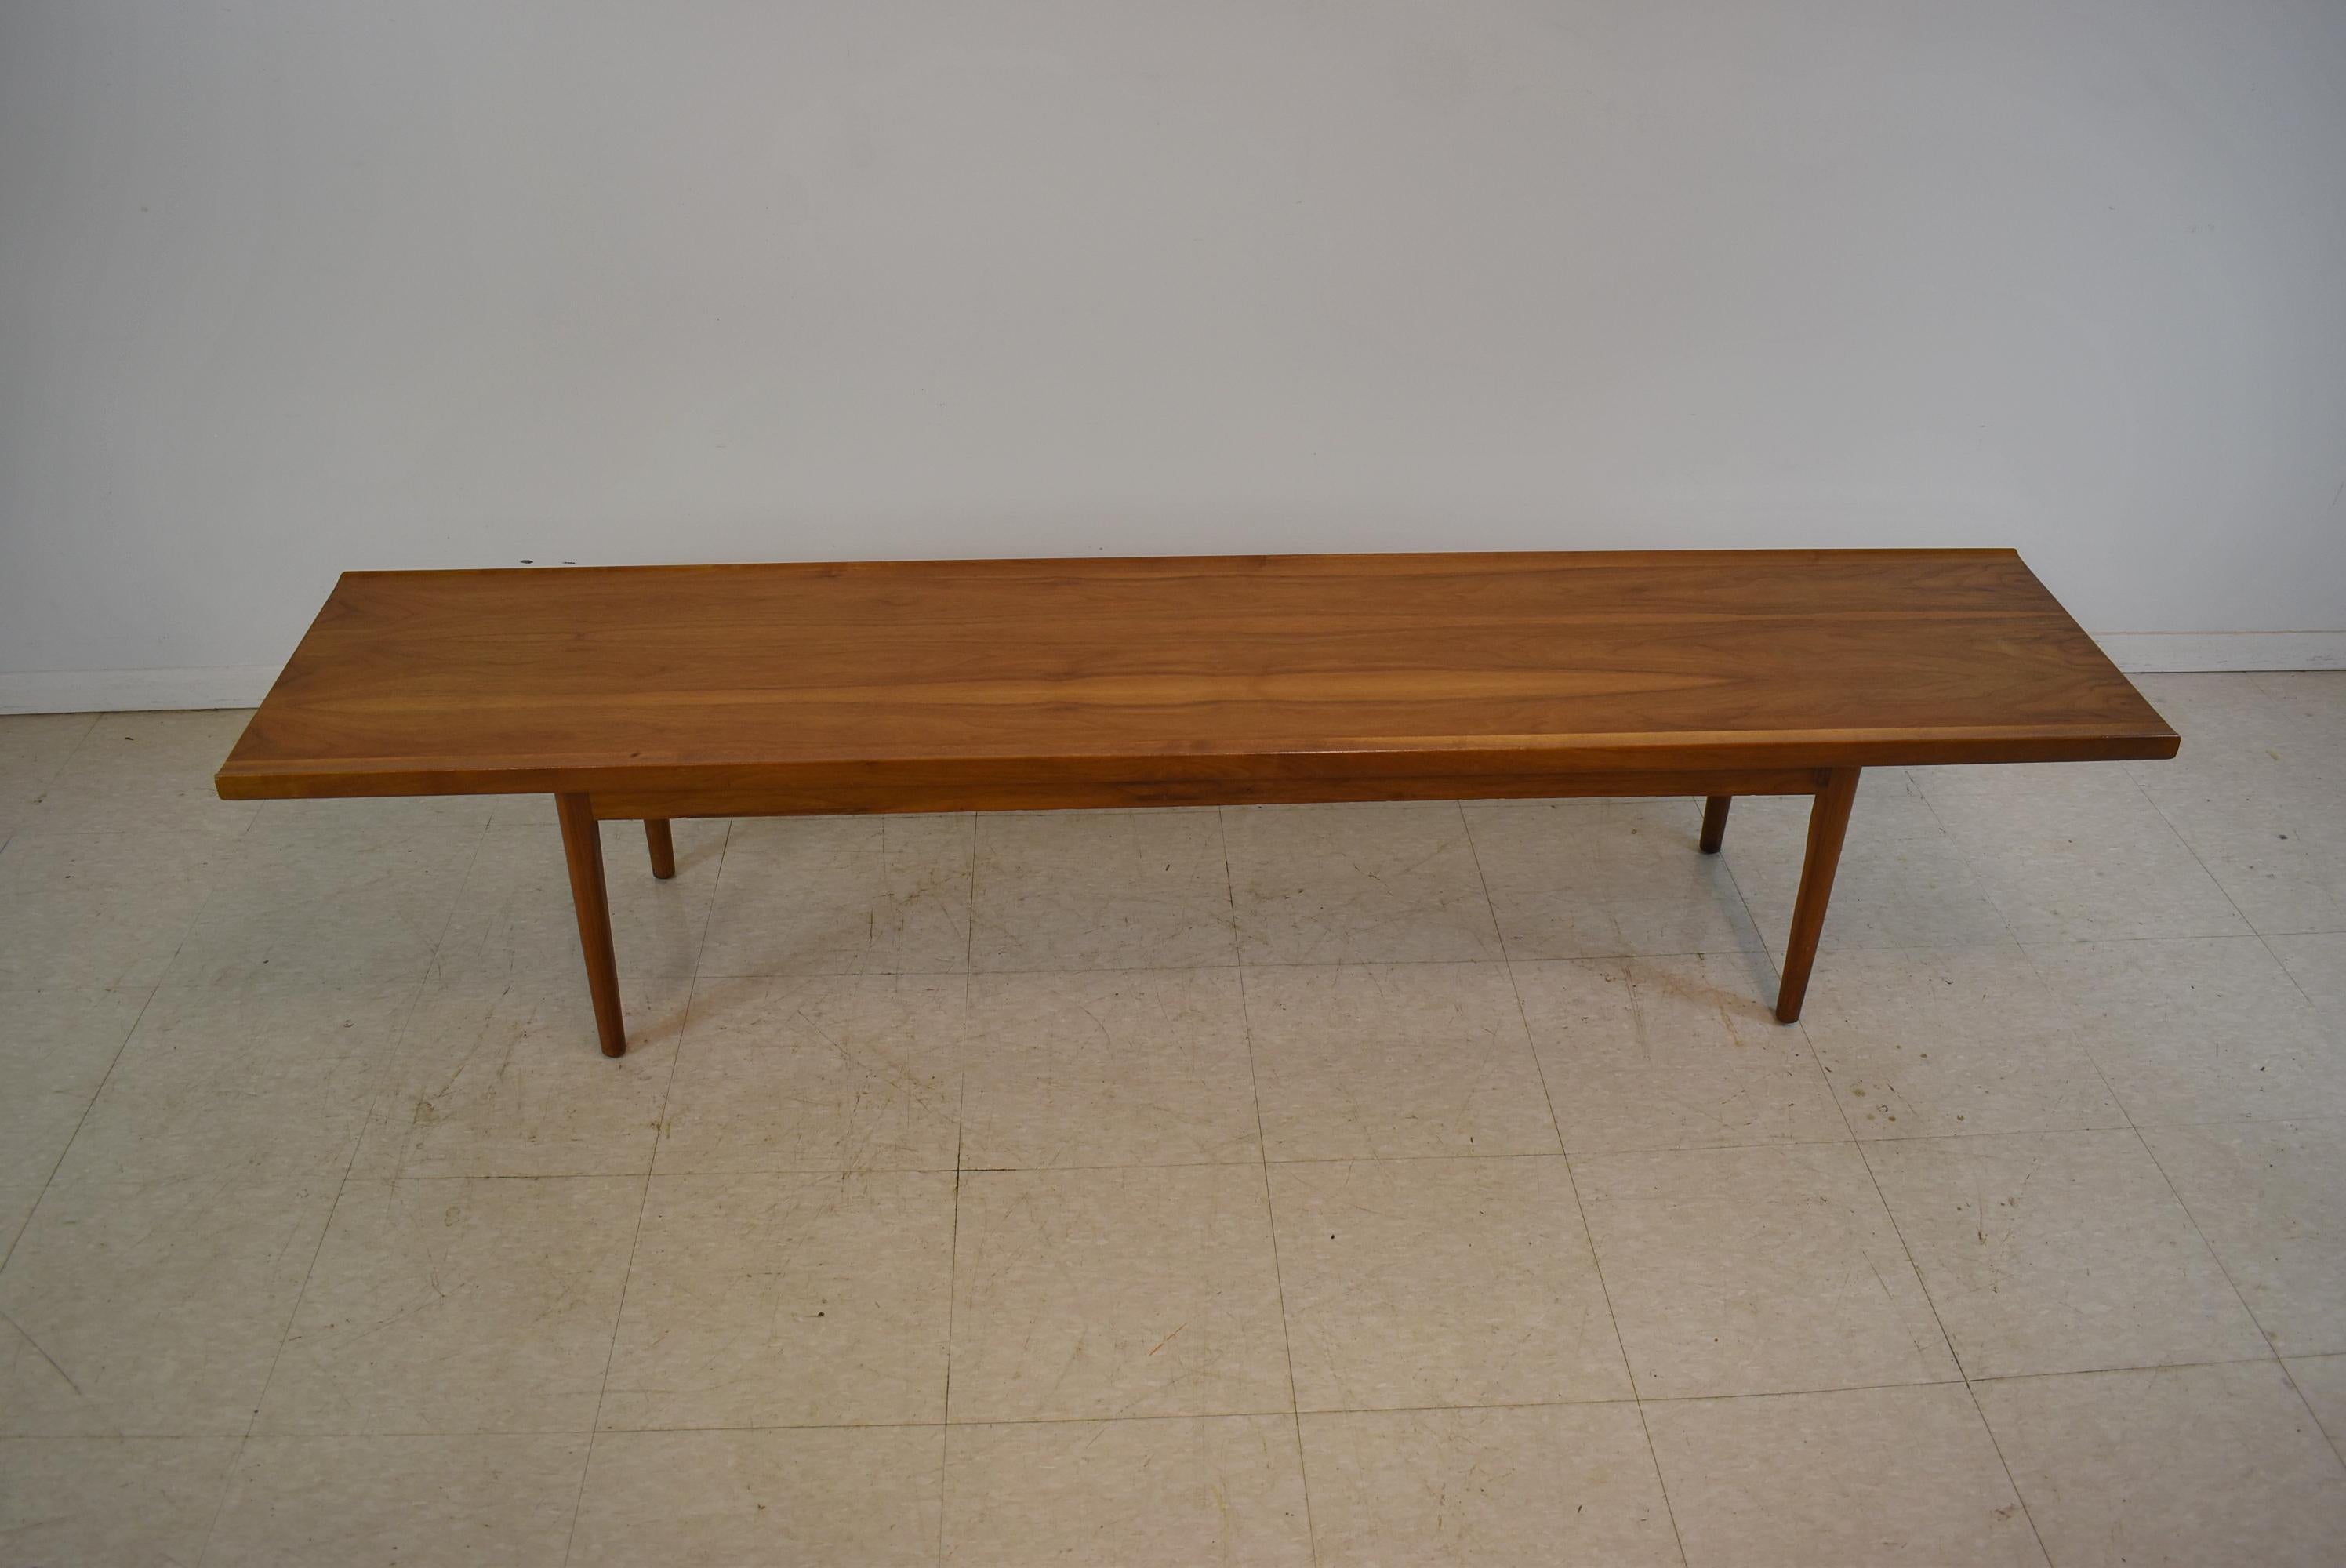 Mid-Century Modern walnut coffee table by Kipp Stewart for Drexel. Surfboard style 
with original finish. Stamped on the bottom. Very nice original finish with light wear. Dimensions: 16